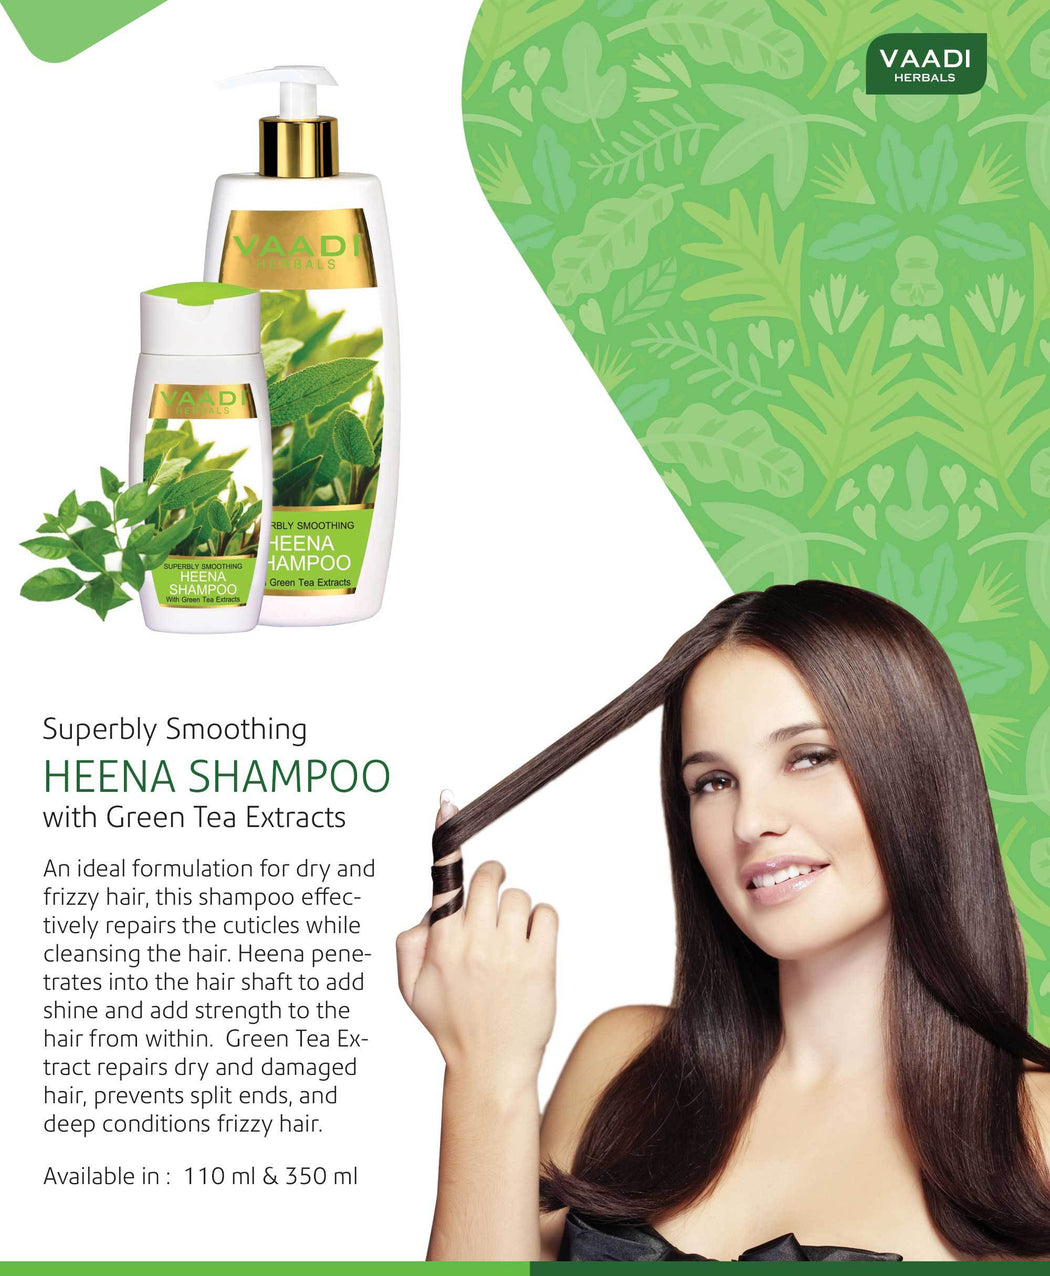 Superbly Smoothing Organic Heena Shampoo with Green Tea Extract - Controls Dry Frizzy Hair - Strengthens Hair (3 x 350 ml/12 fl oz)